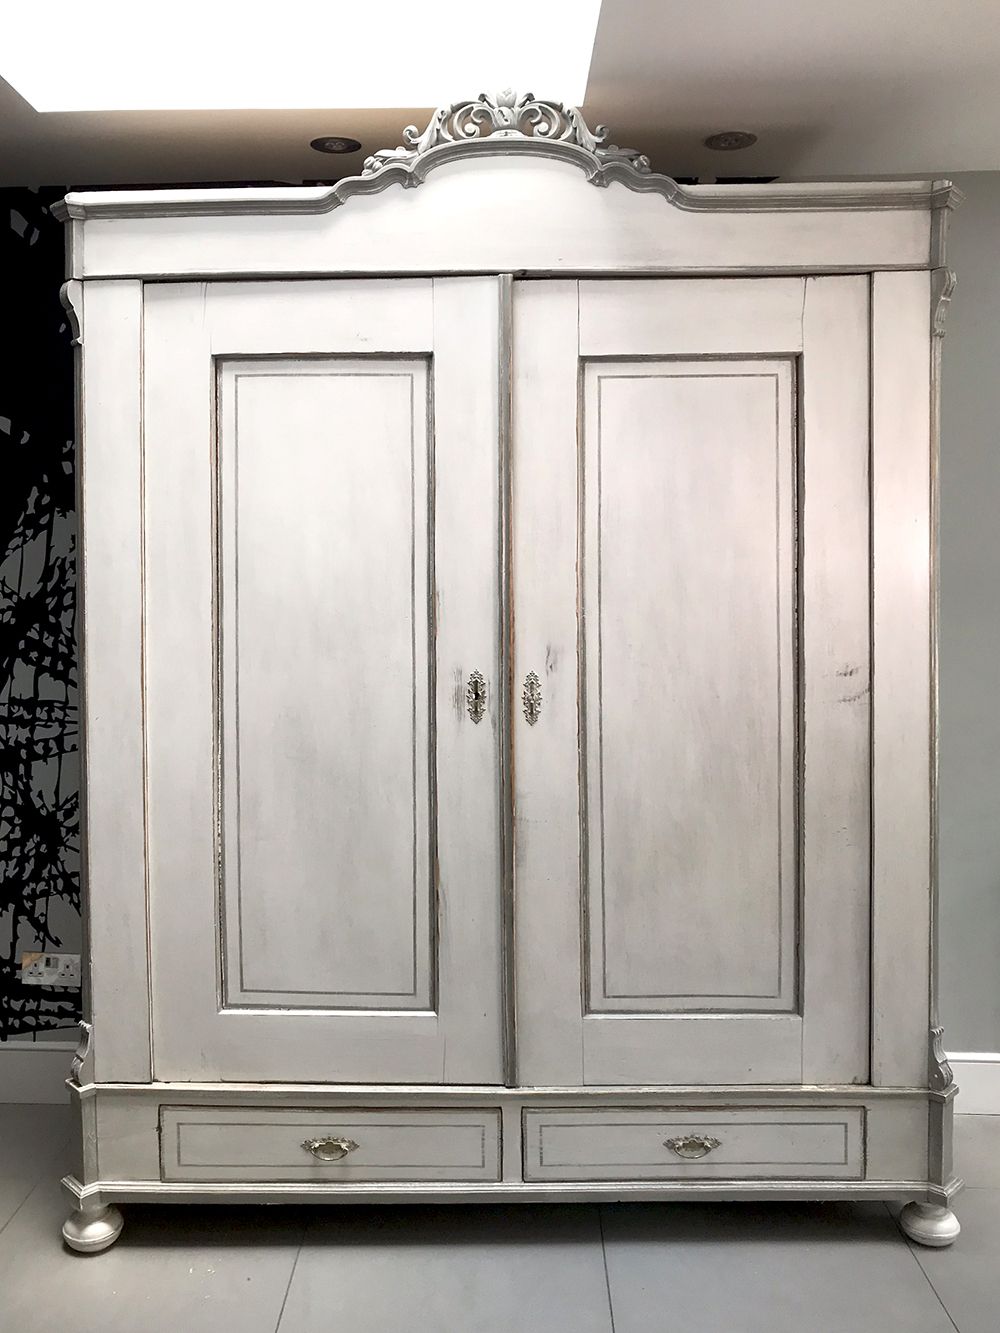 Antique French Painted Armoire – Sold | Napoleonrockefeller – Vintage And  Retro Furniture, Bespoke Hand Crafted Chairs And Seating With Regard To Antique French Wardrobes (Gallery 5 of 20)